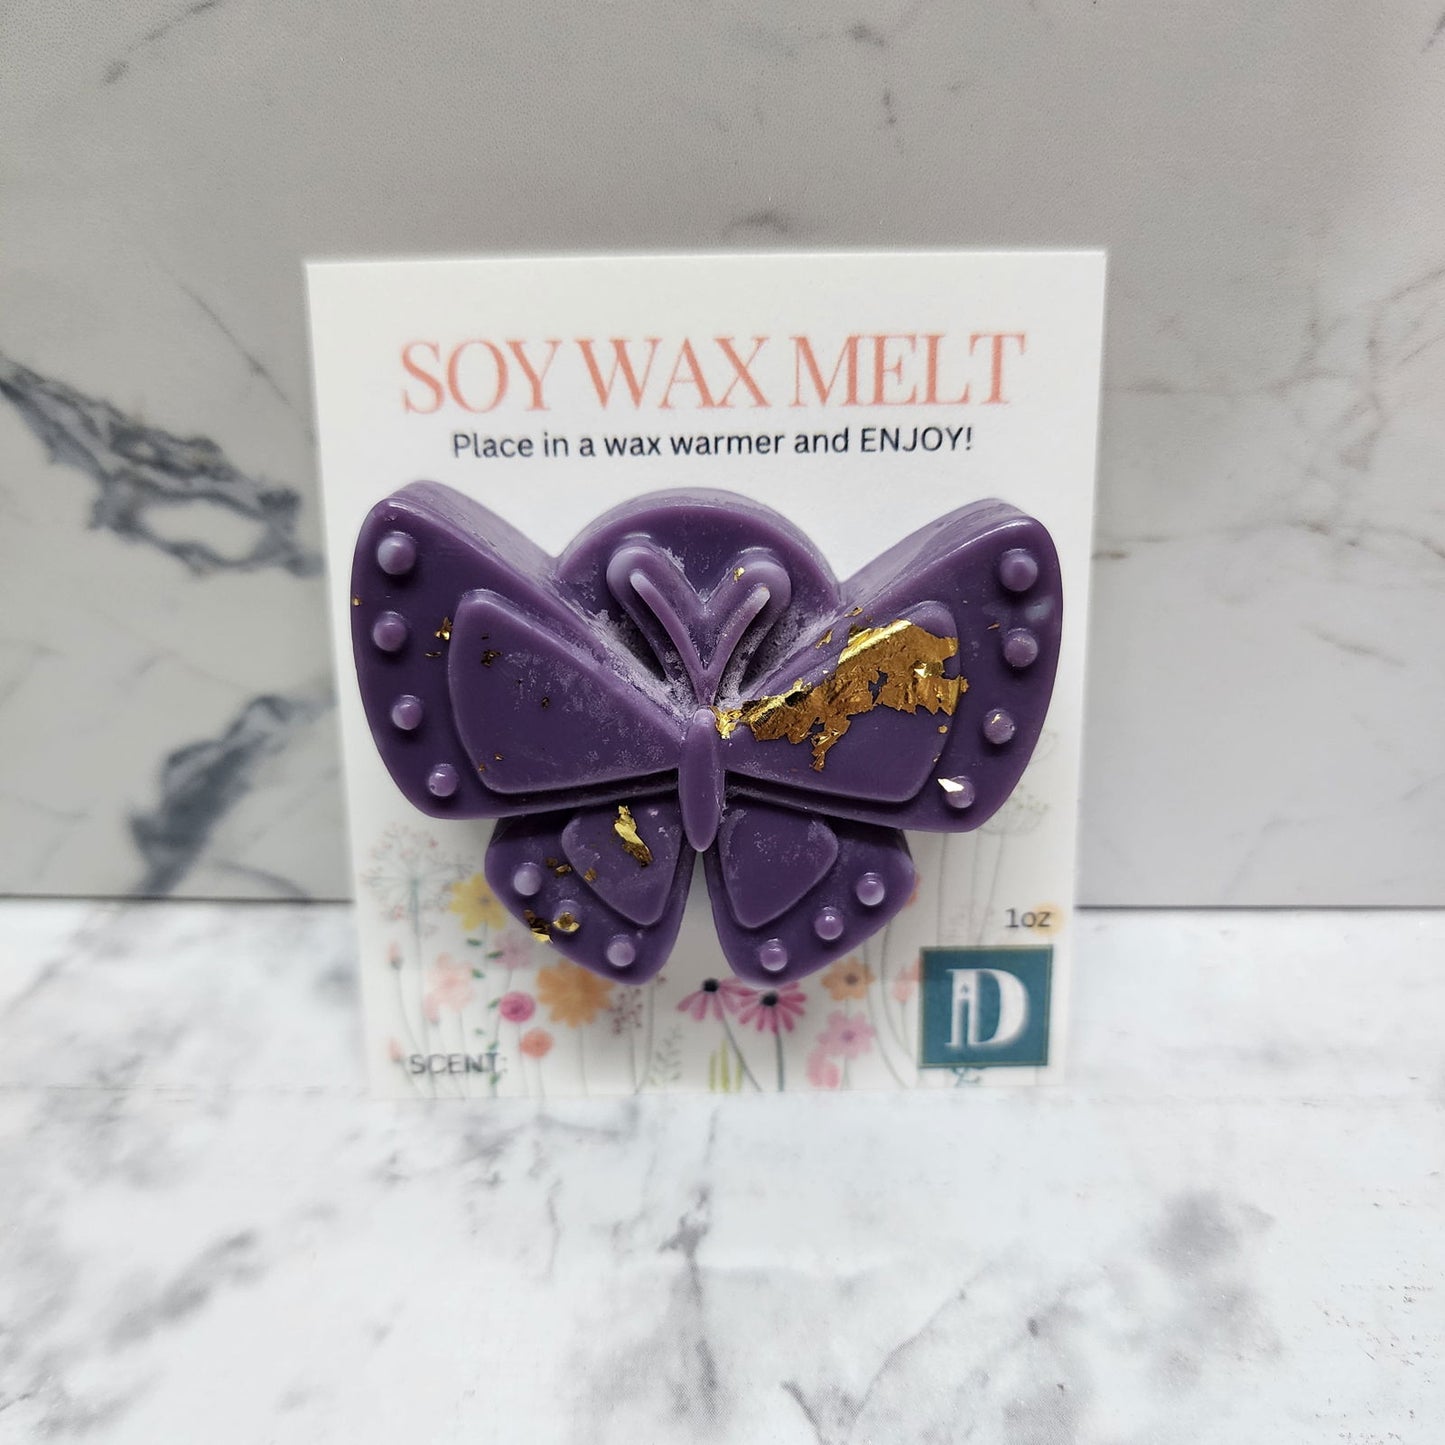 Big Butterfly Melt | Soy Wax - D SCENT 